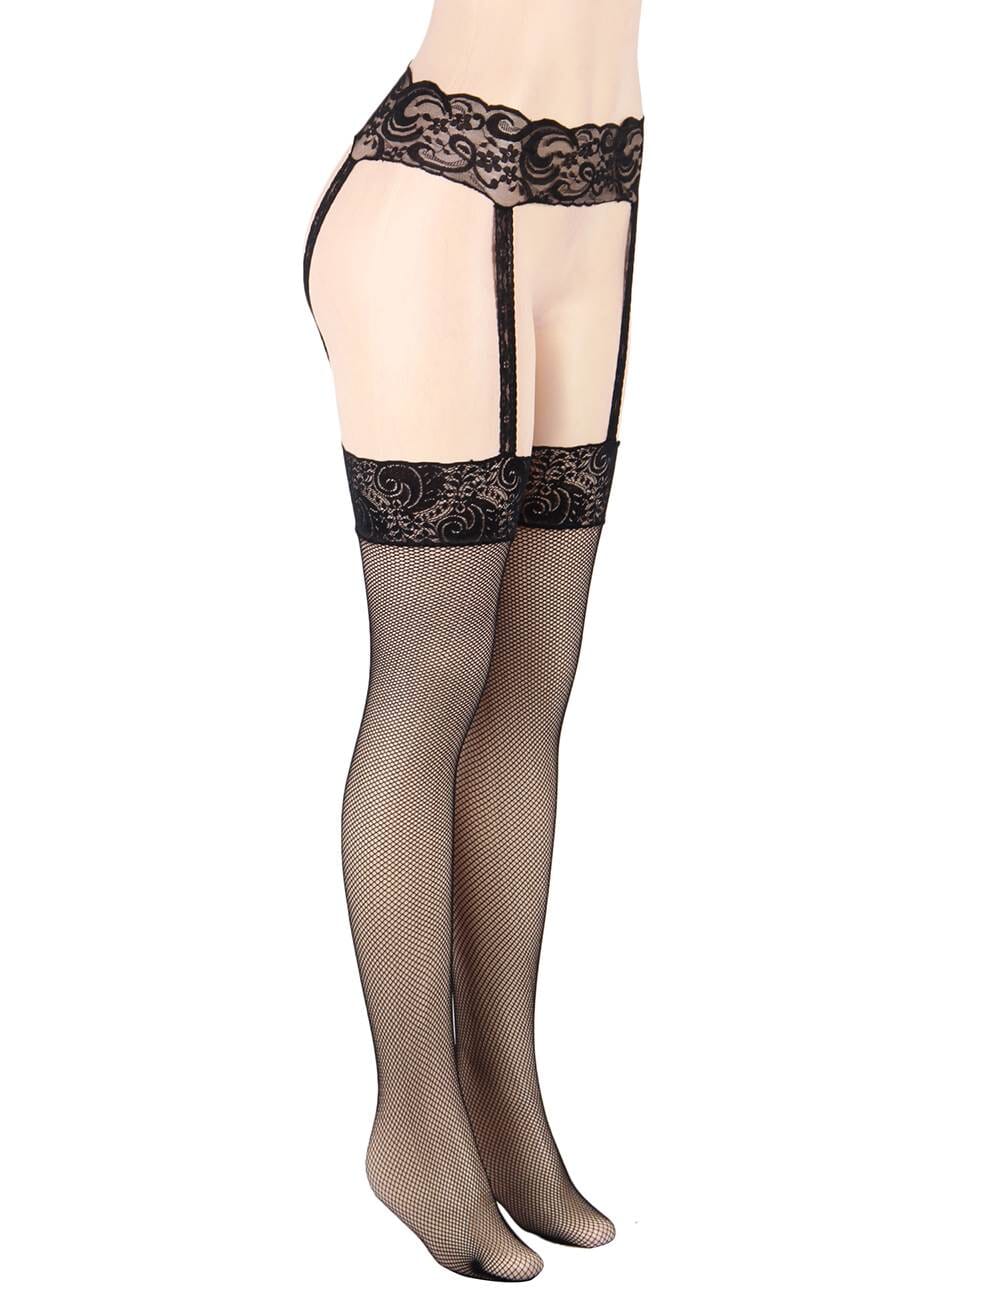 Fishnet Suspender Tights with Flower Lace Trim Stockings & Hosiery Scandals Lingerie 